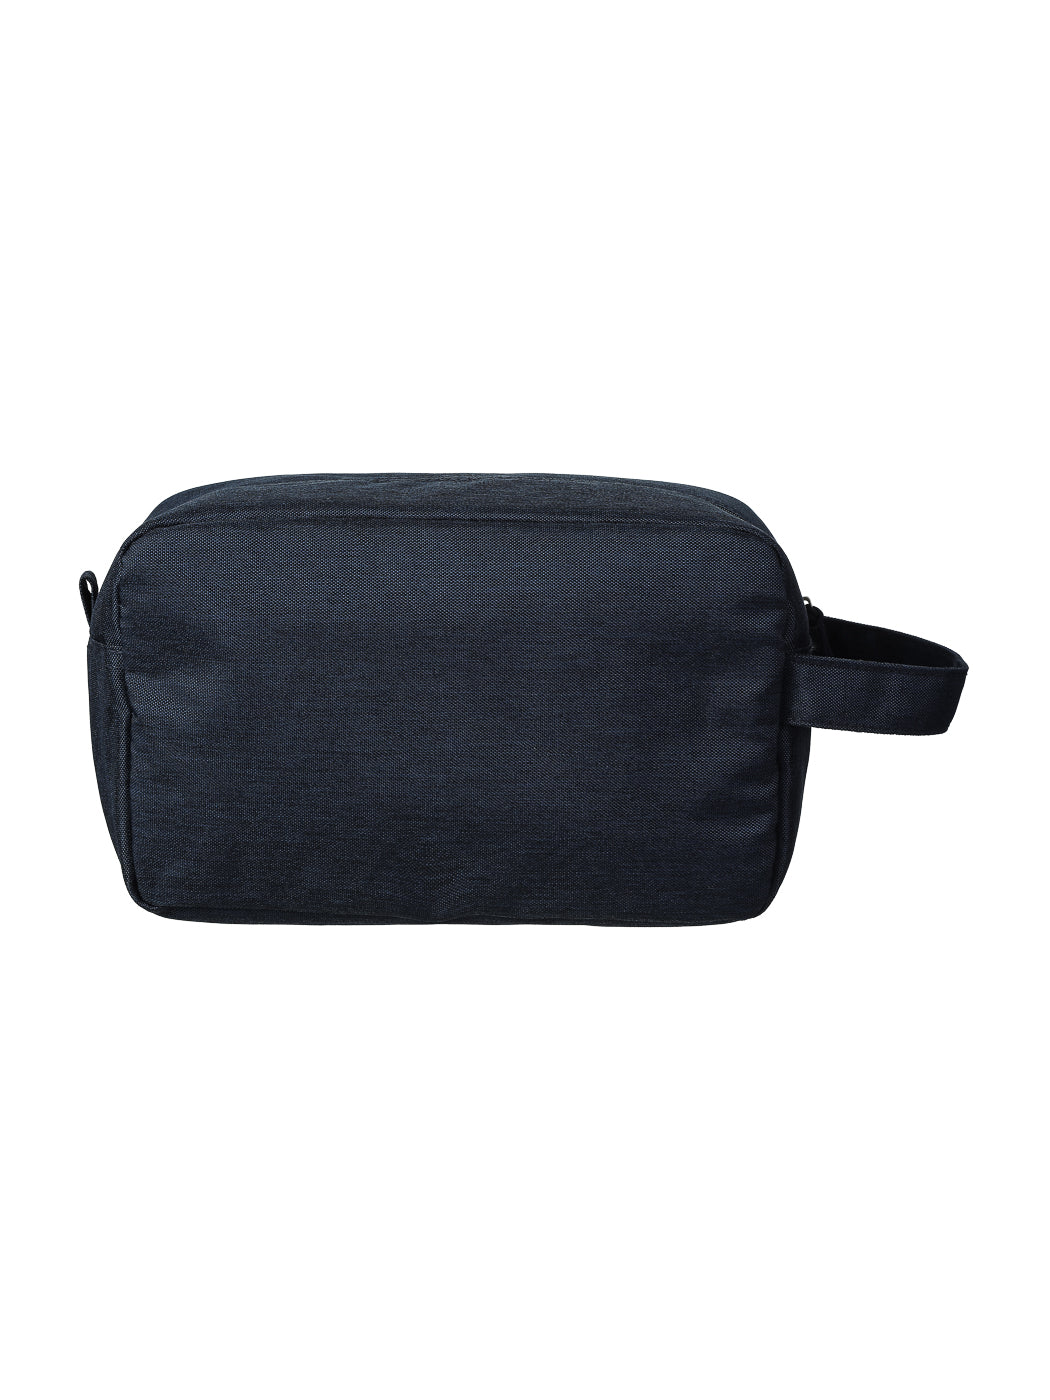 MINISO YOUTH OF THE TIME STORAGE BAG(NAVY BLUE) 2010861010108 TRAVEL STORAGE BAG